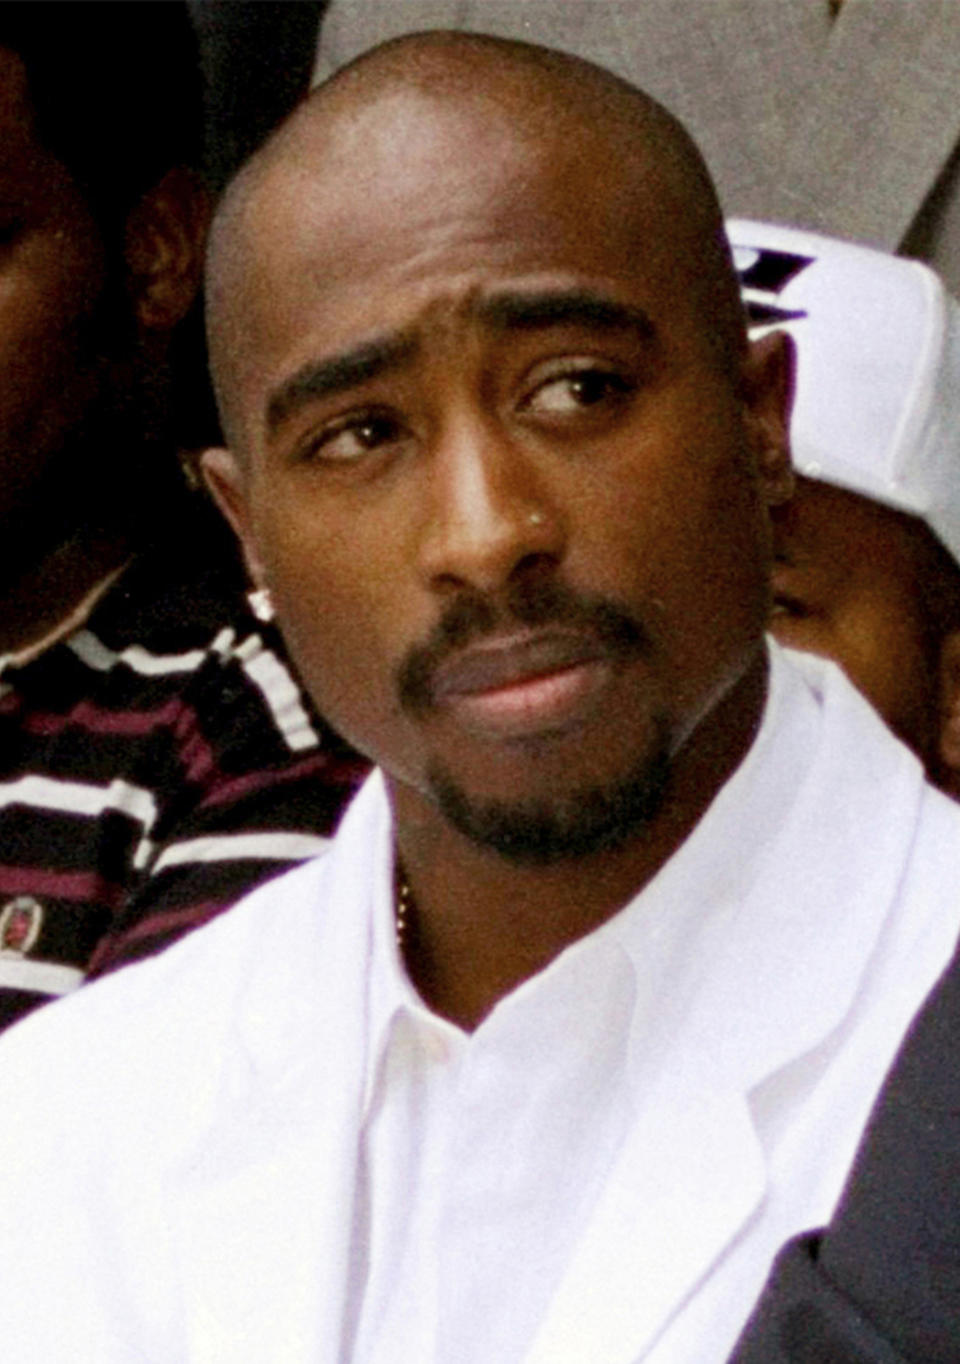 FILE - Rapper Tupac Shakur attends a voter registration event in South Central Los Angeles, Aug. 15, 1996. Duane Keith “Keffe D” Davis, a former Southern California street gang leader, pleaded not guilty Thursday, Nov. 2, 2023, to orchestrating a drive-by shooting that killed Shakur in 1996 in Las Vegas. (AP Photo/Frank Wiese, File)